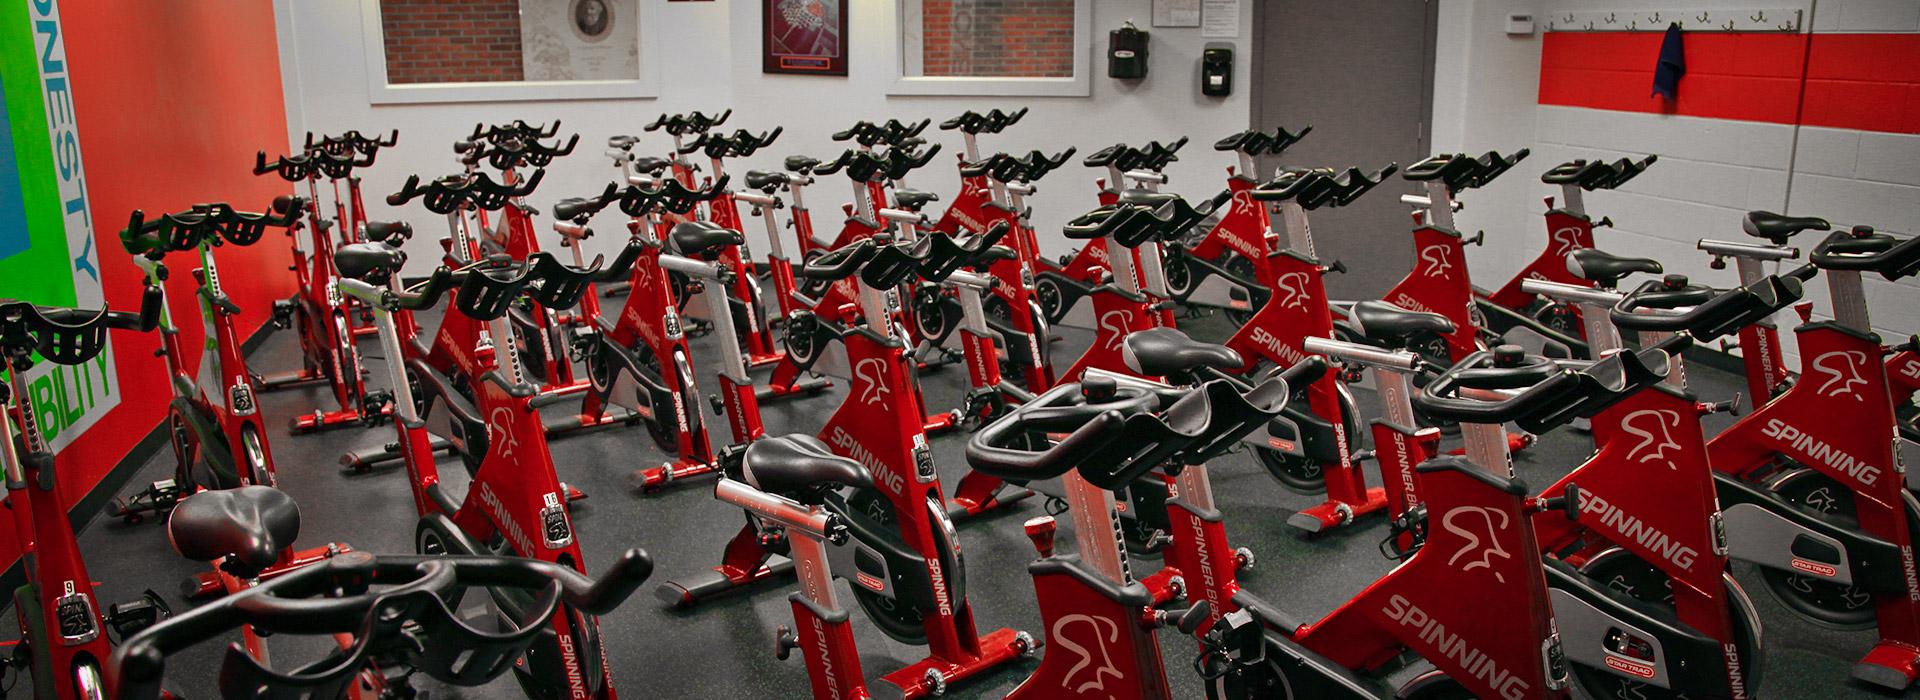 Greenbrier Family YMCA group cycling class